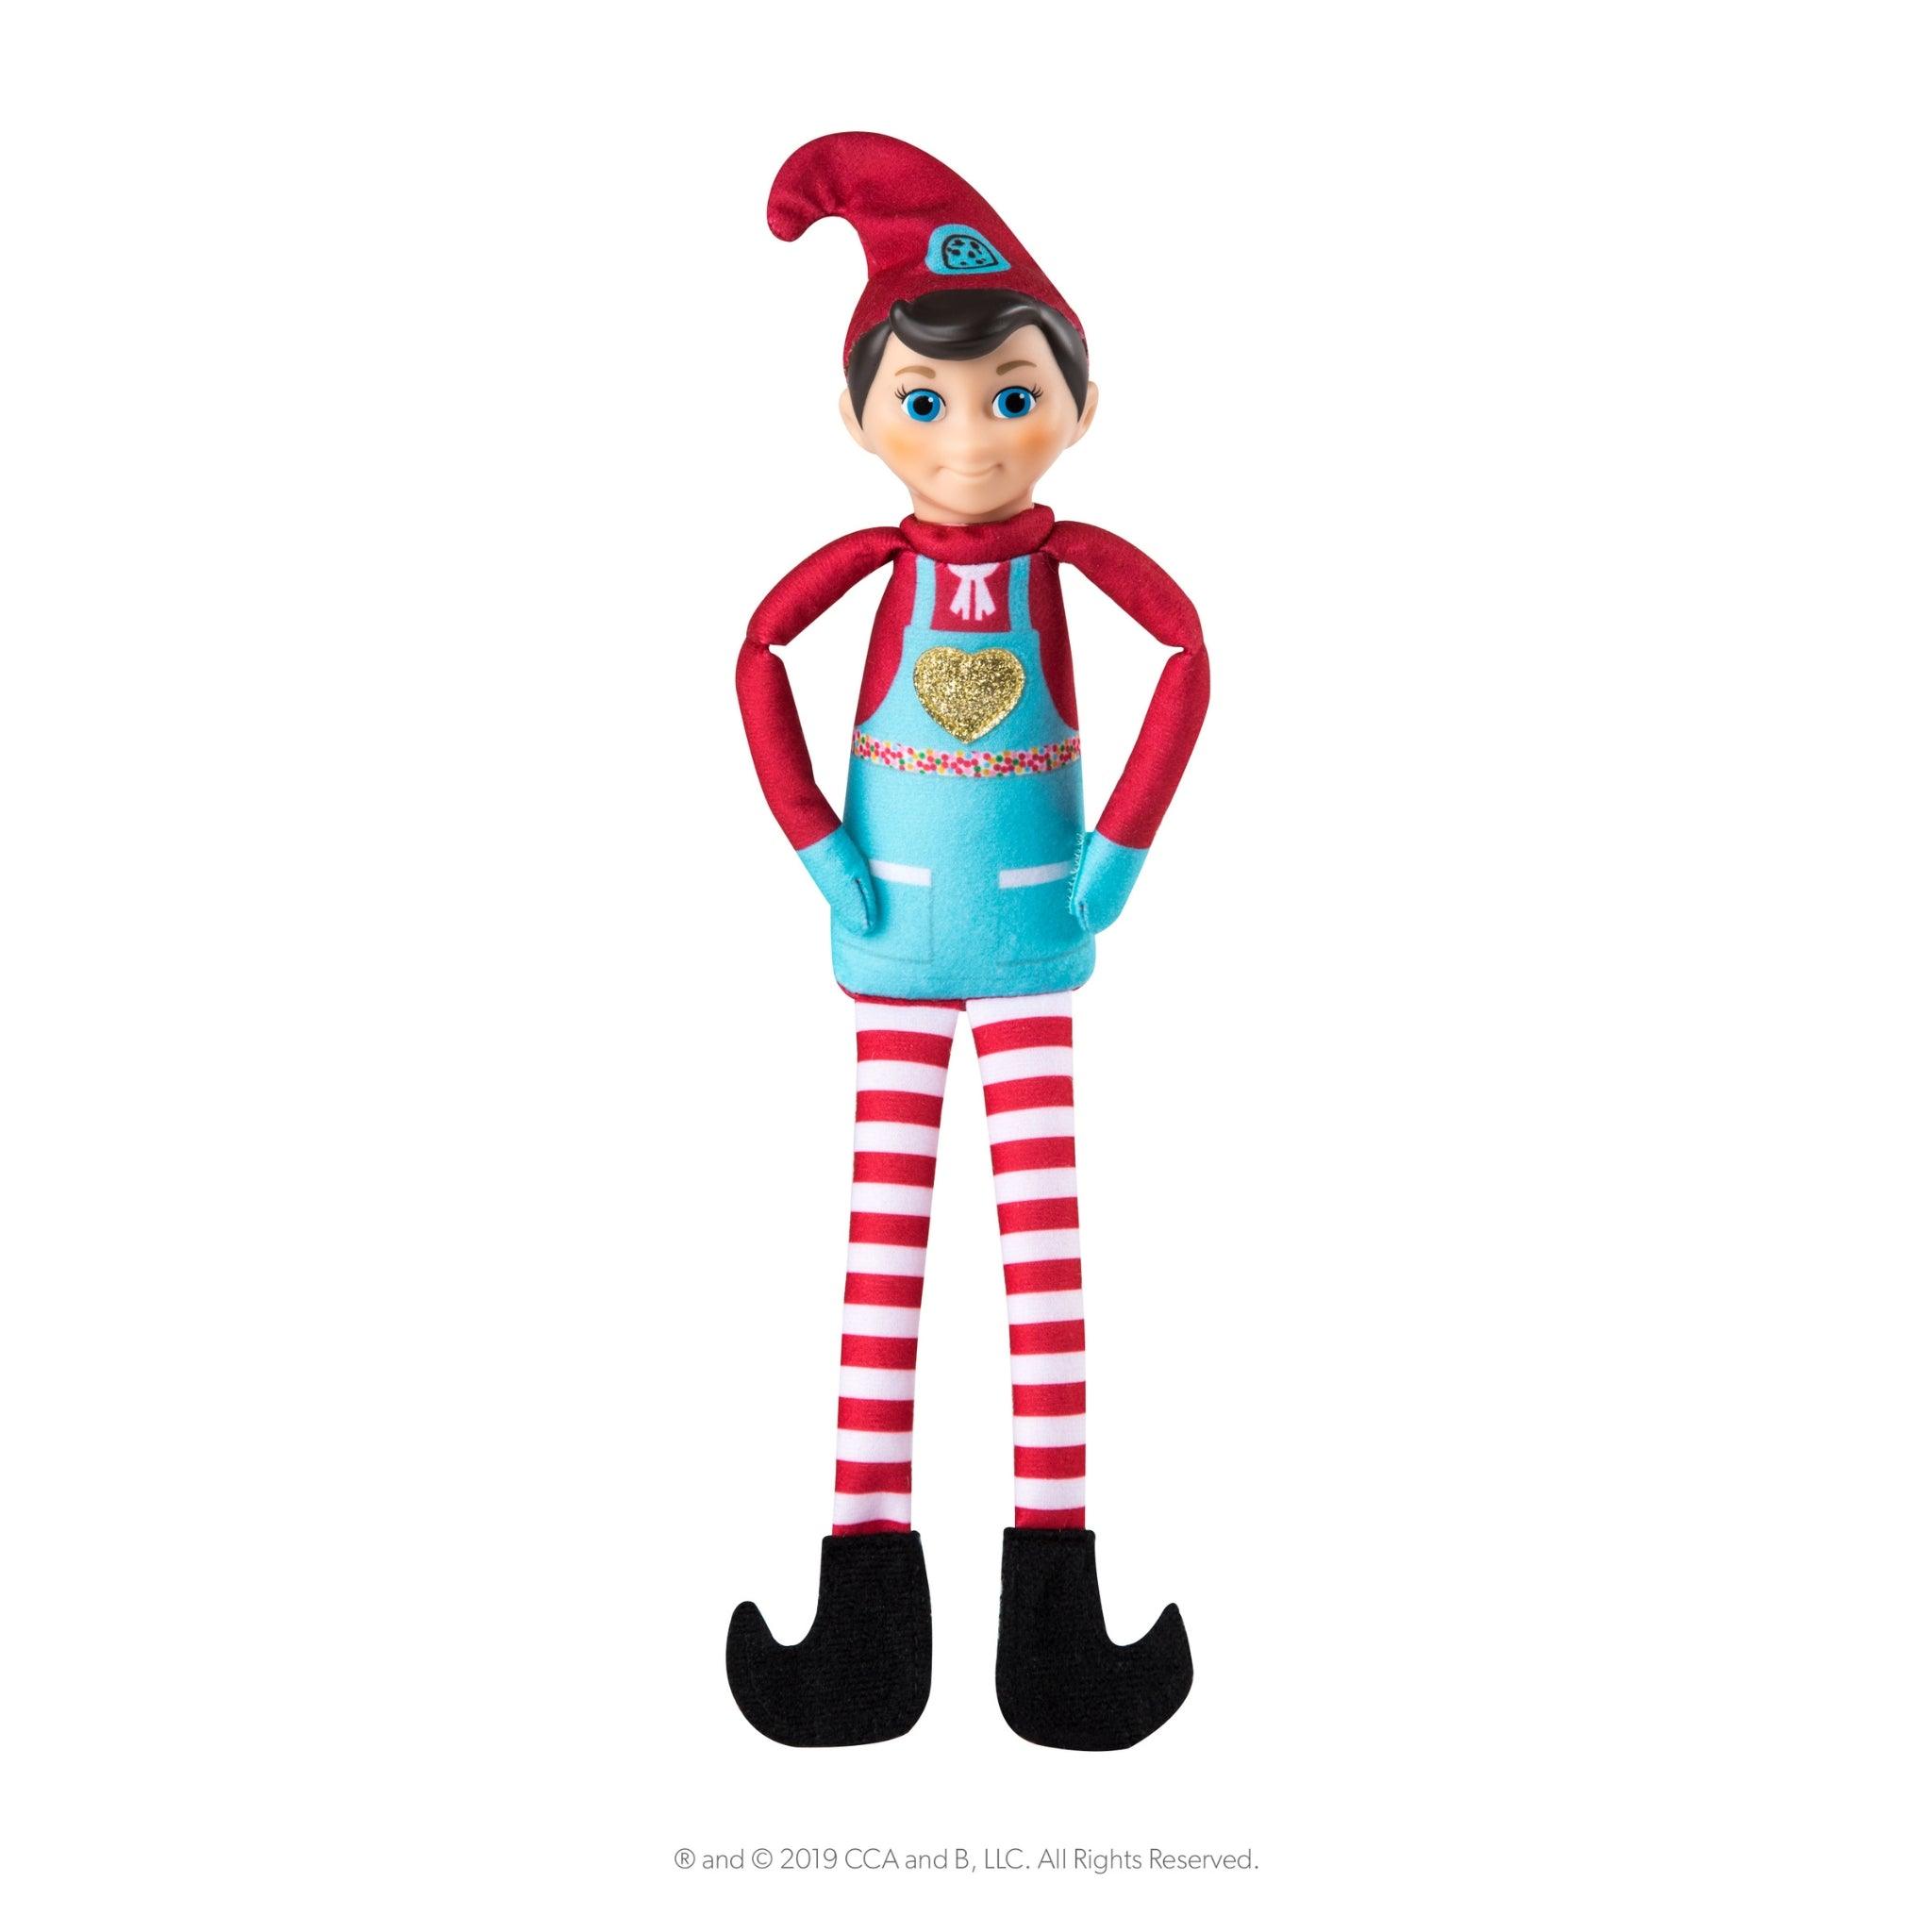 Elf Mates™ - Collect all three characters from the creators of The Elf on  the Shelf - The Elf on The Shelf